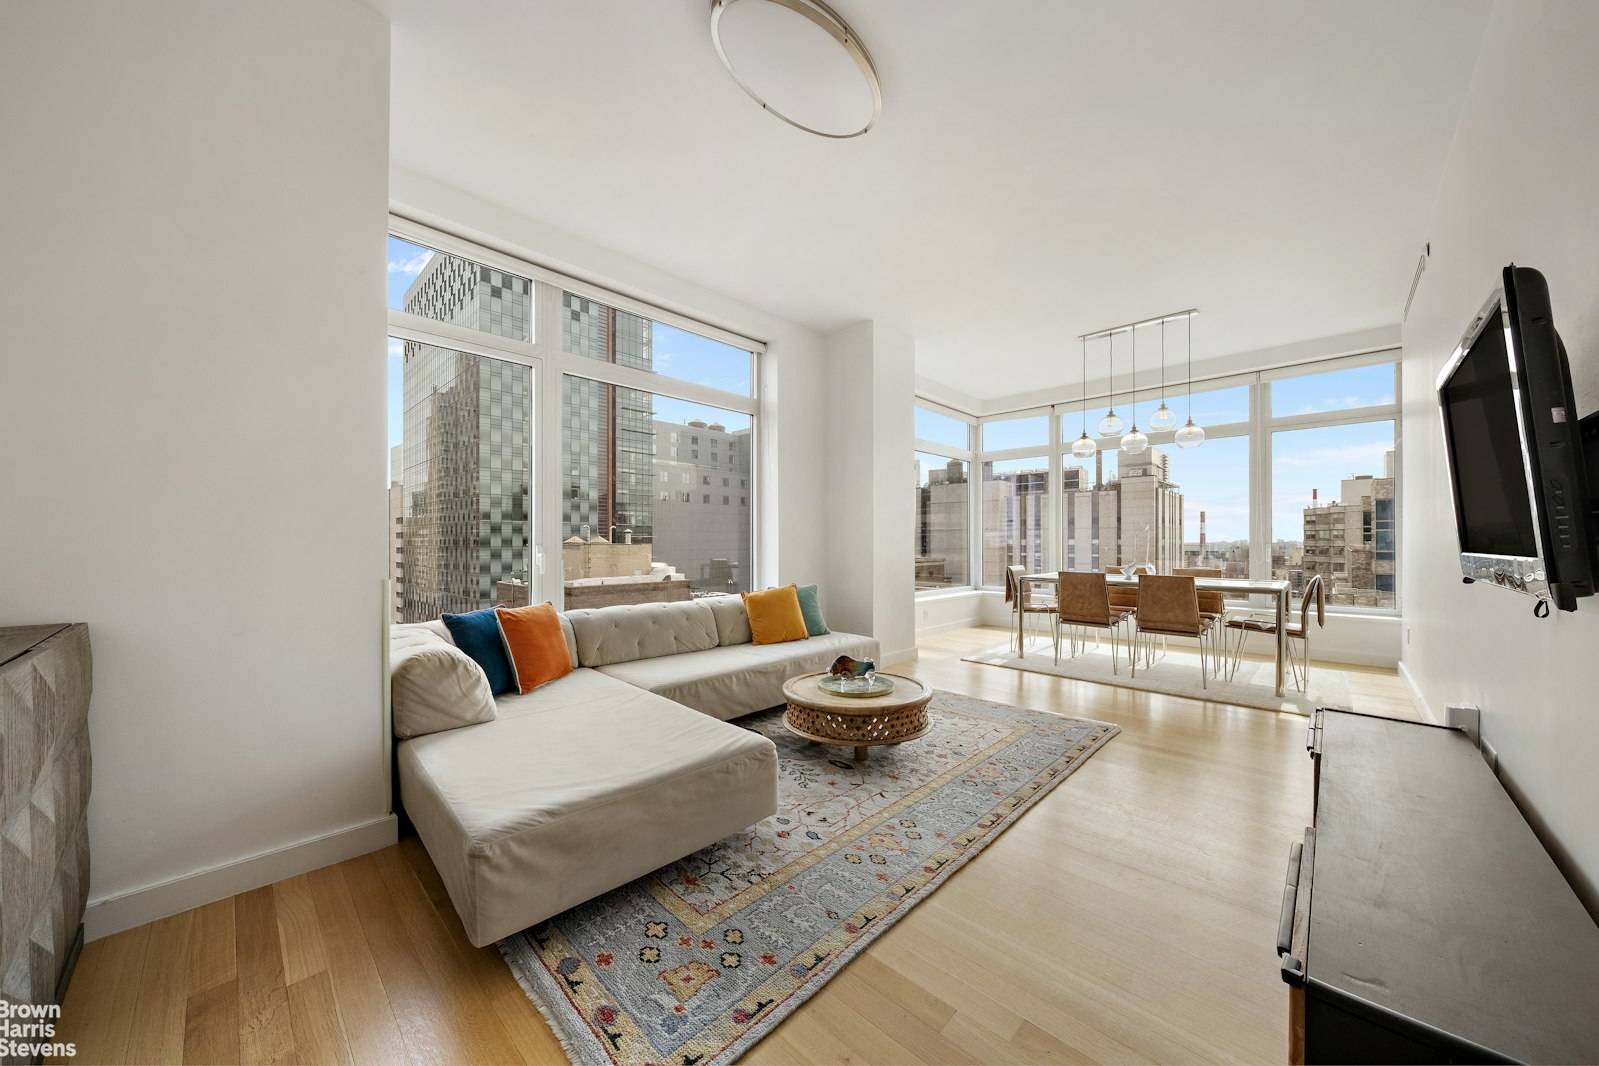 Breathtaking unimpeded city views from floor to ceiling windows frame every room in Residence 20C.